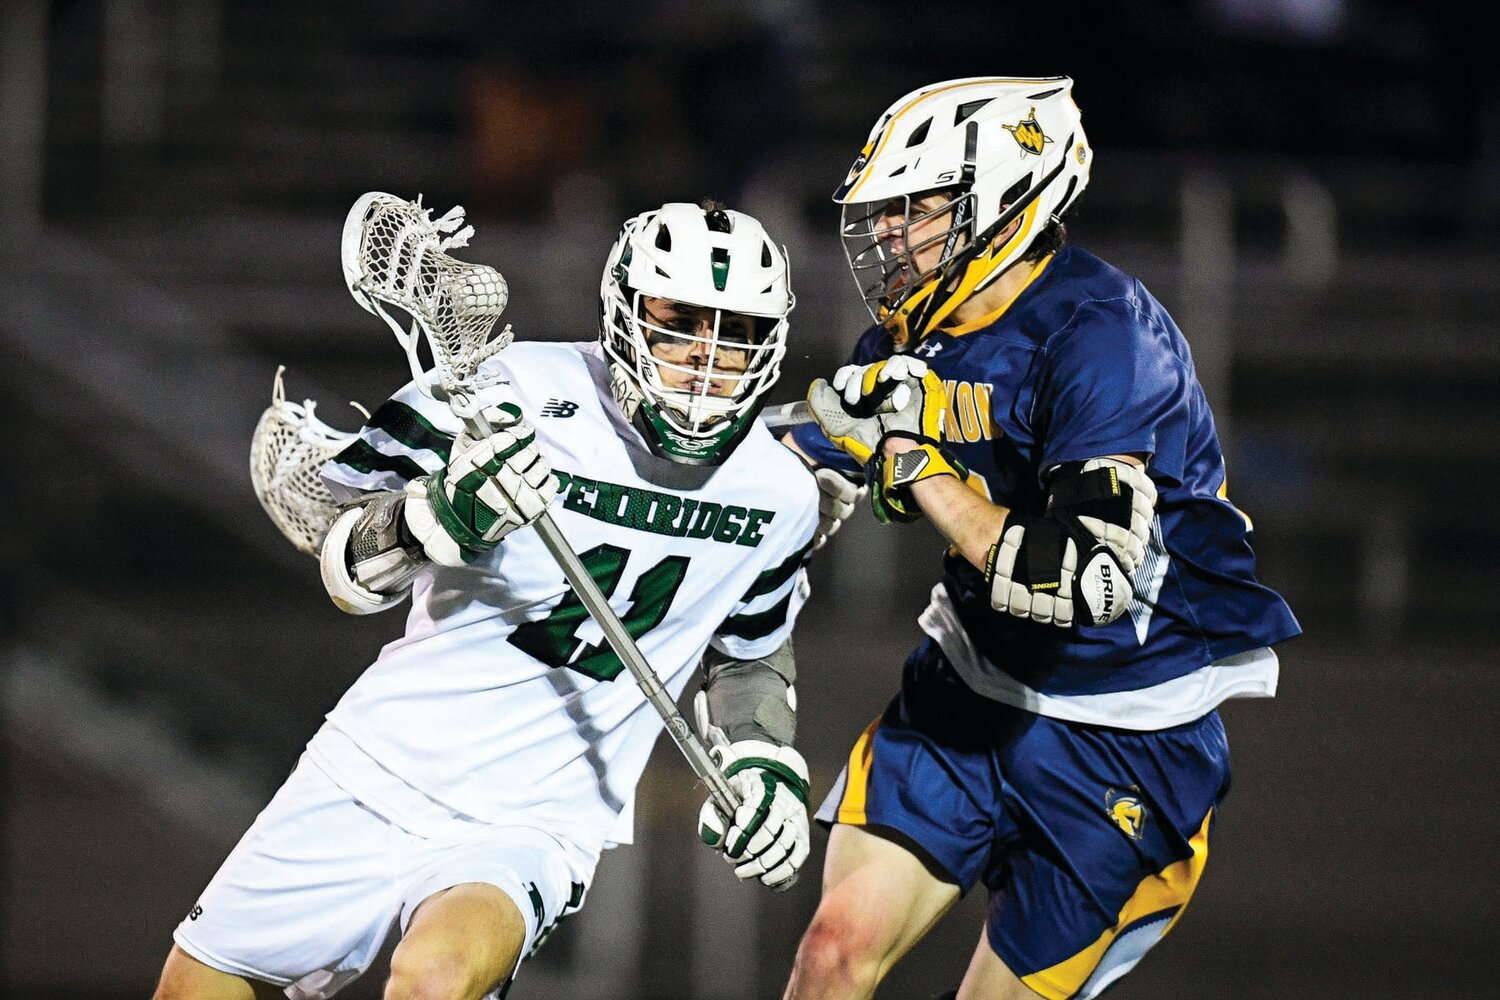 Pennridge’s Matt Kriney makes one last attempt to rush the net and get around Wissahickon’s Gavin Myers on the last play of the game.